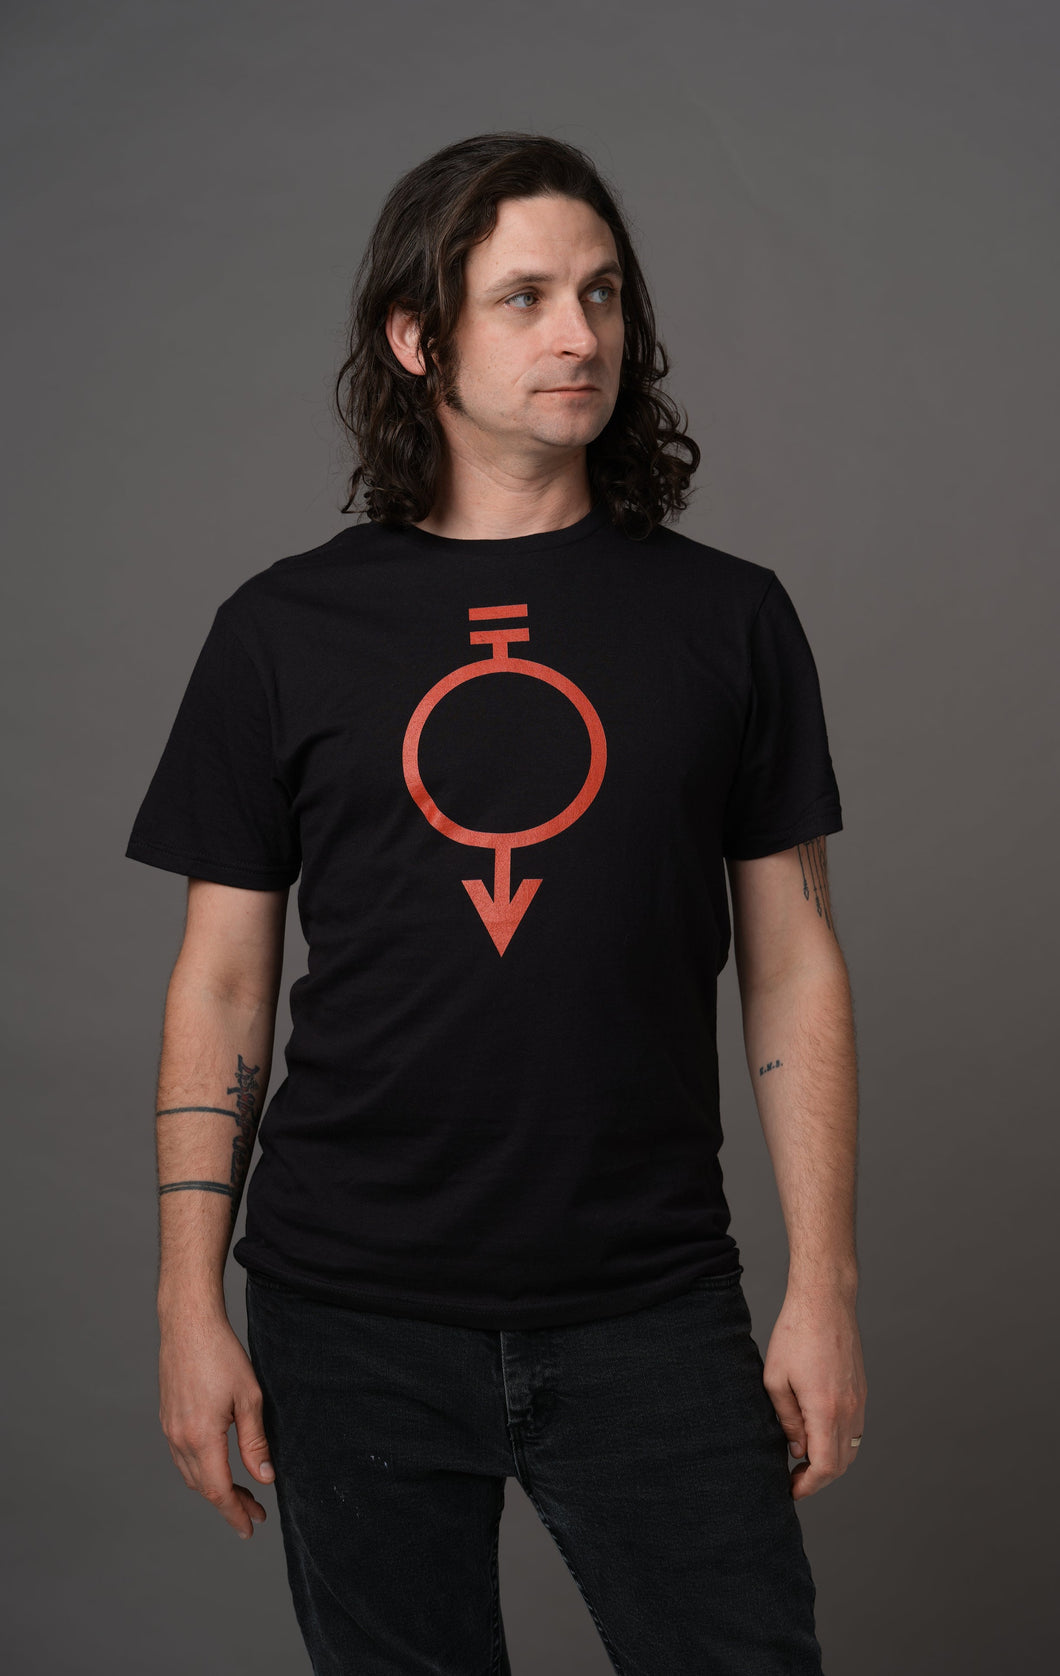 Black shirt printed with the red sigil for manual laborers and miners